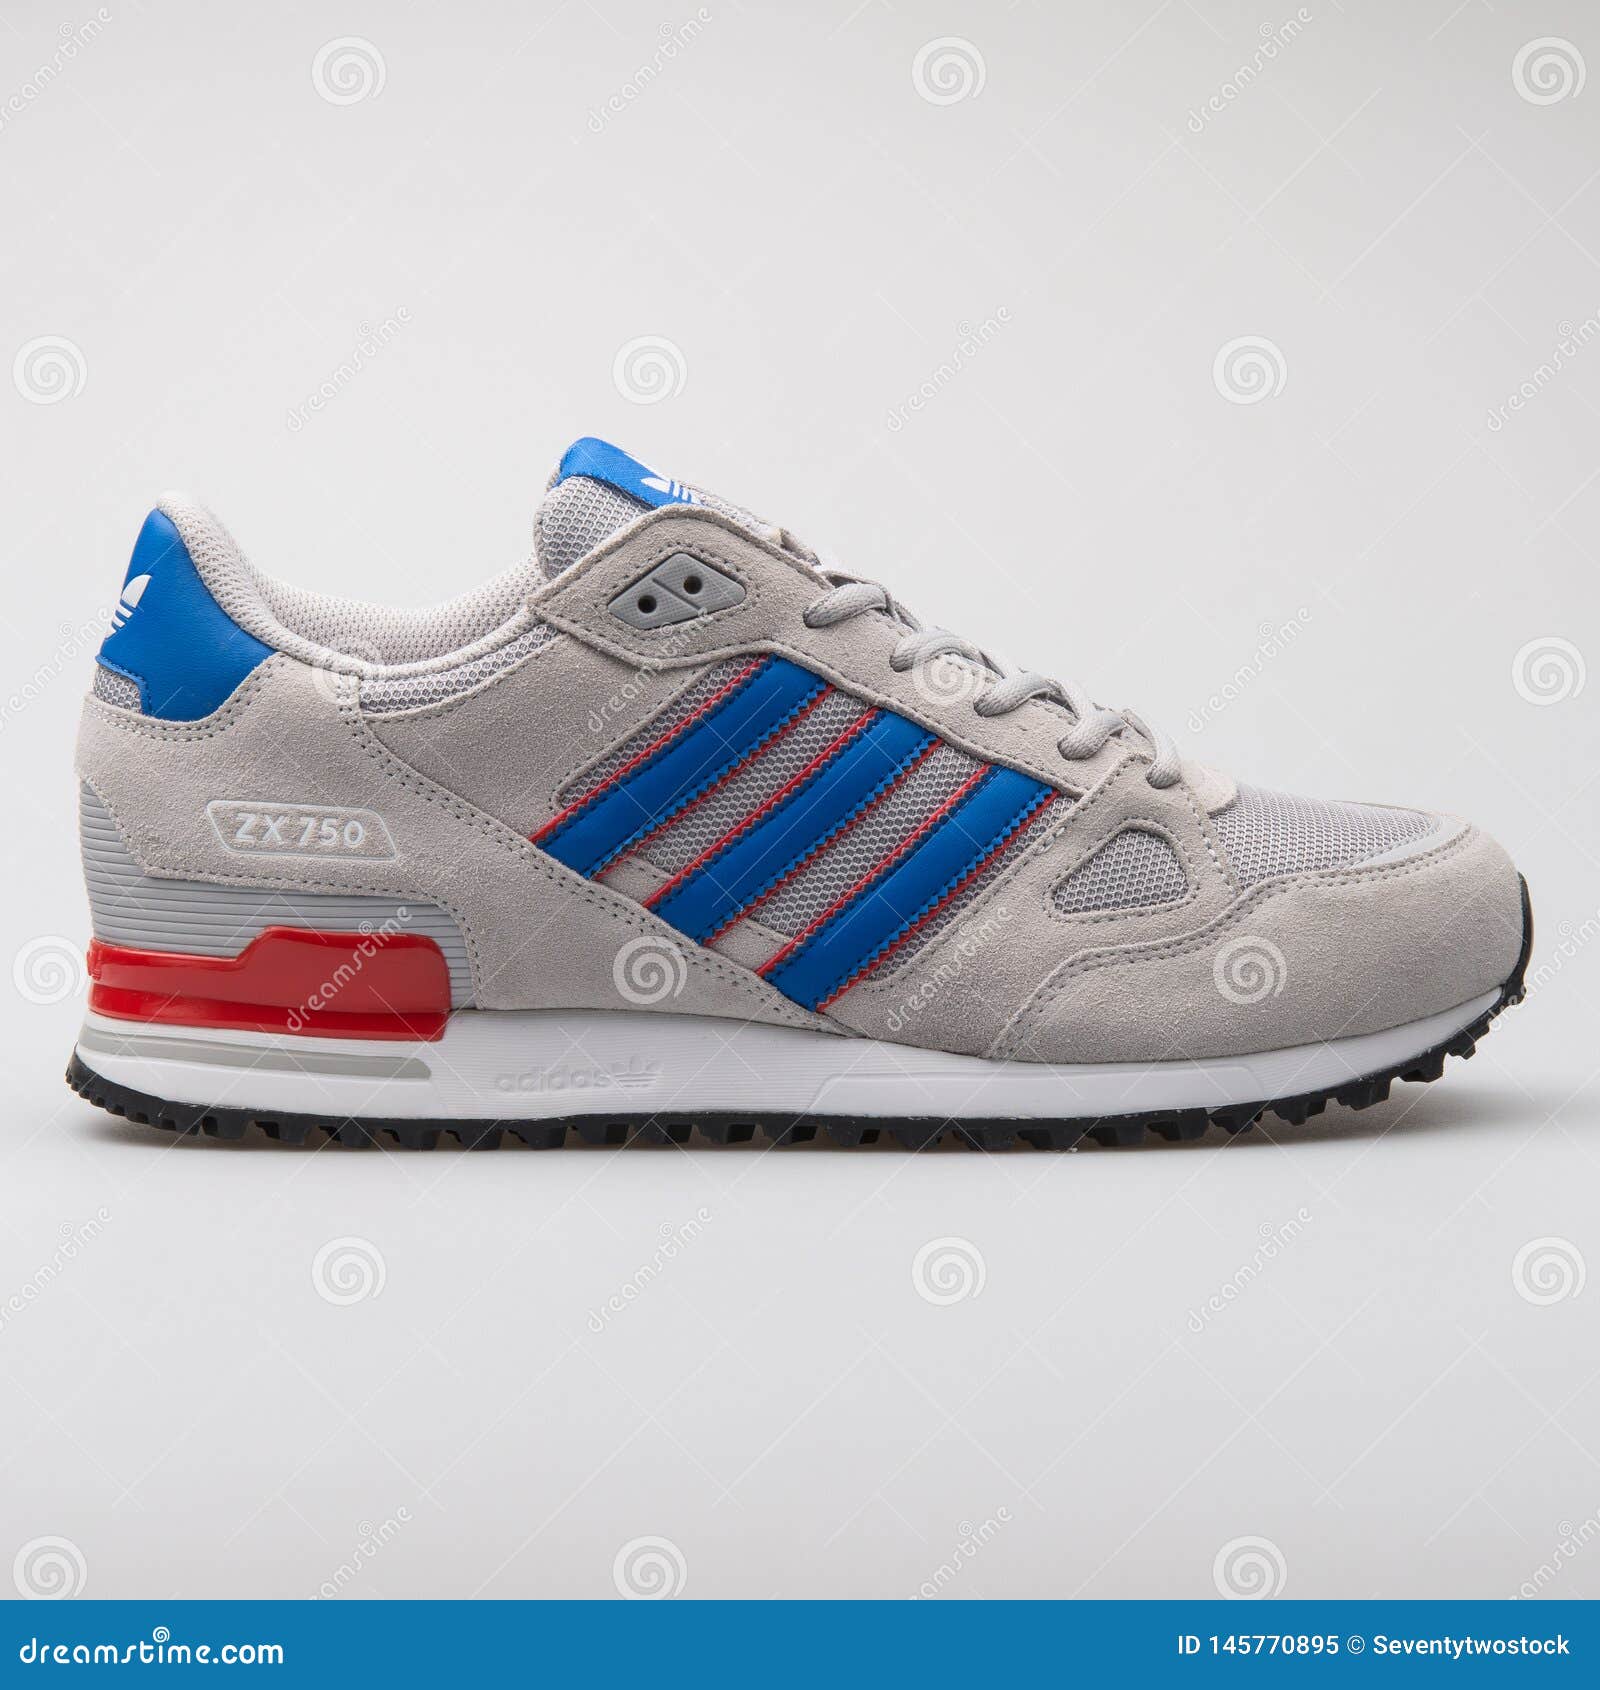 ZX750 Grey, Blue and Red Sneaker Editorial Image - Image of exercise, product: 145770895